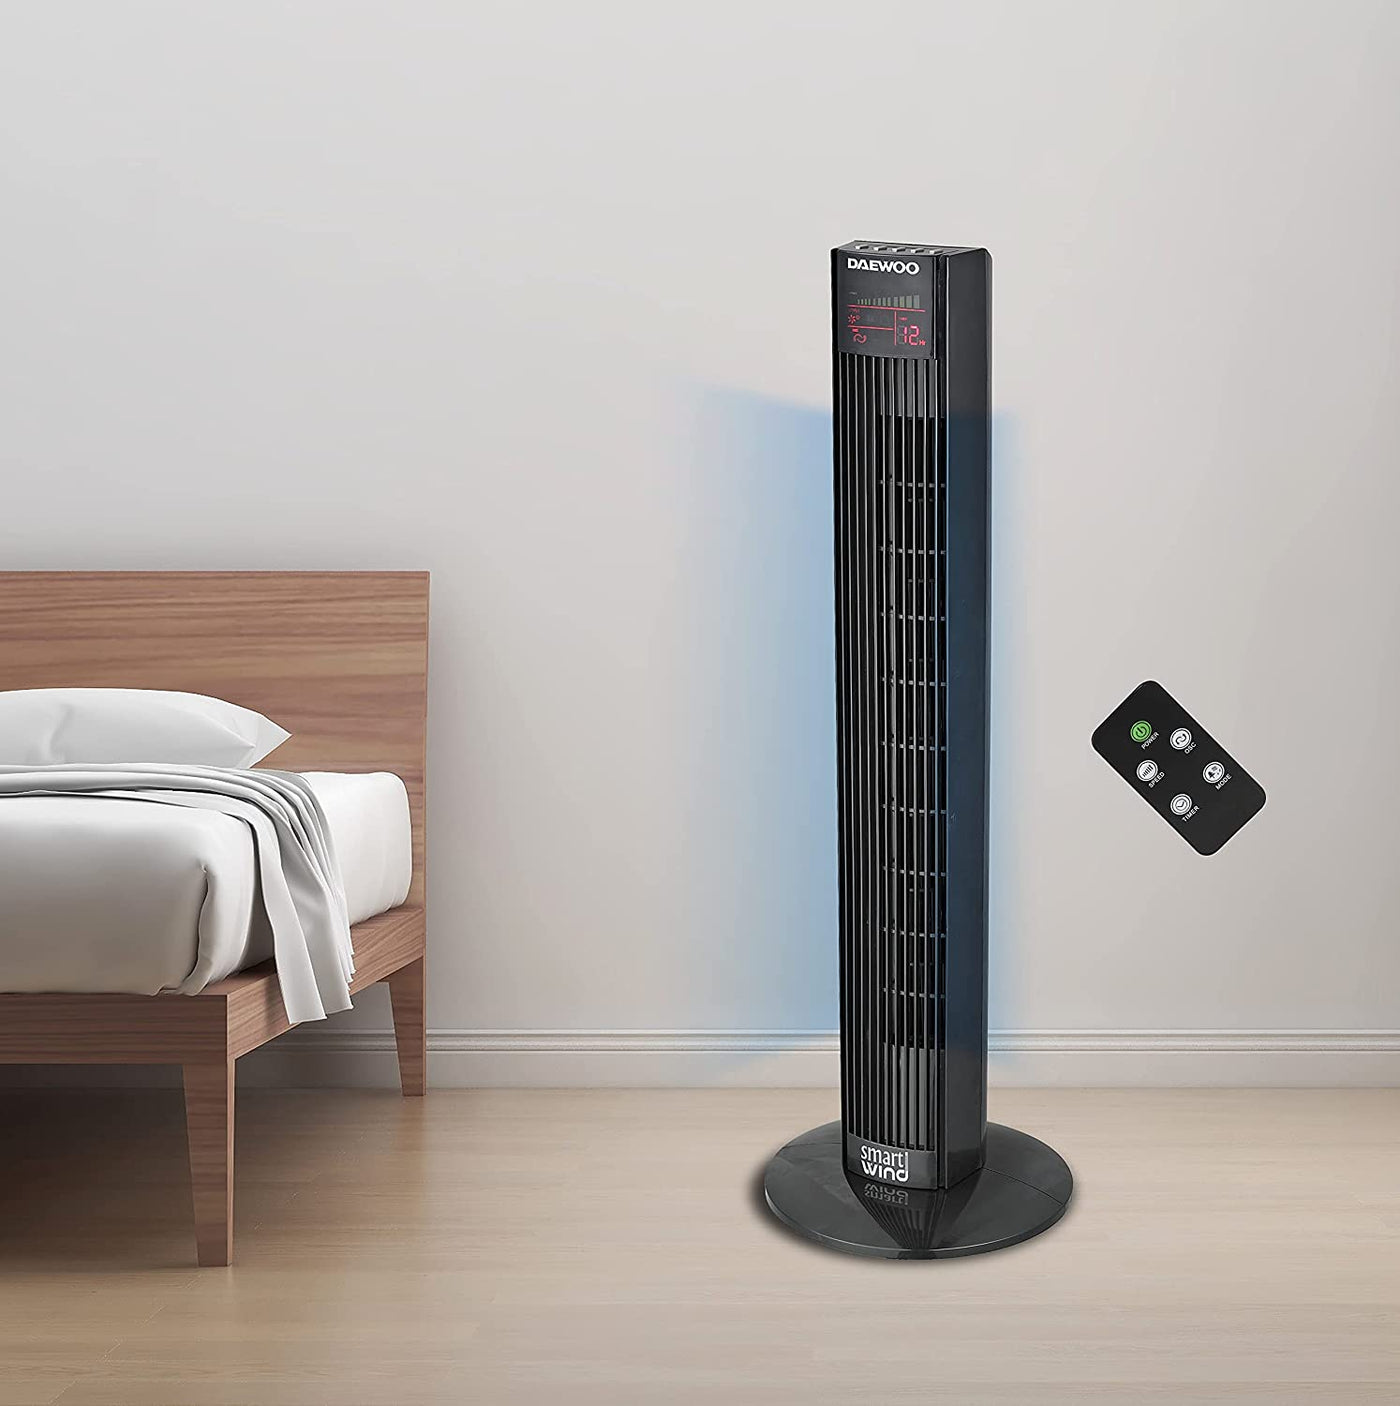 Digital 3 Speed Tower Fan with Timer and Oscillation 45W Korean Technology DTF36DR Black